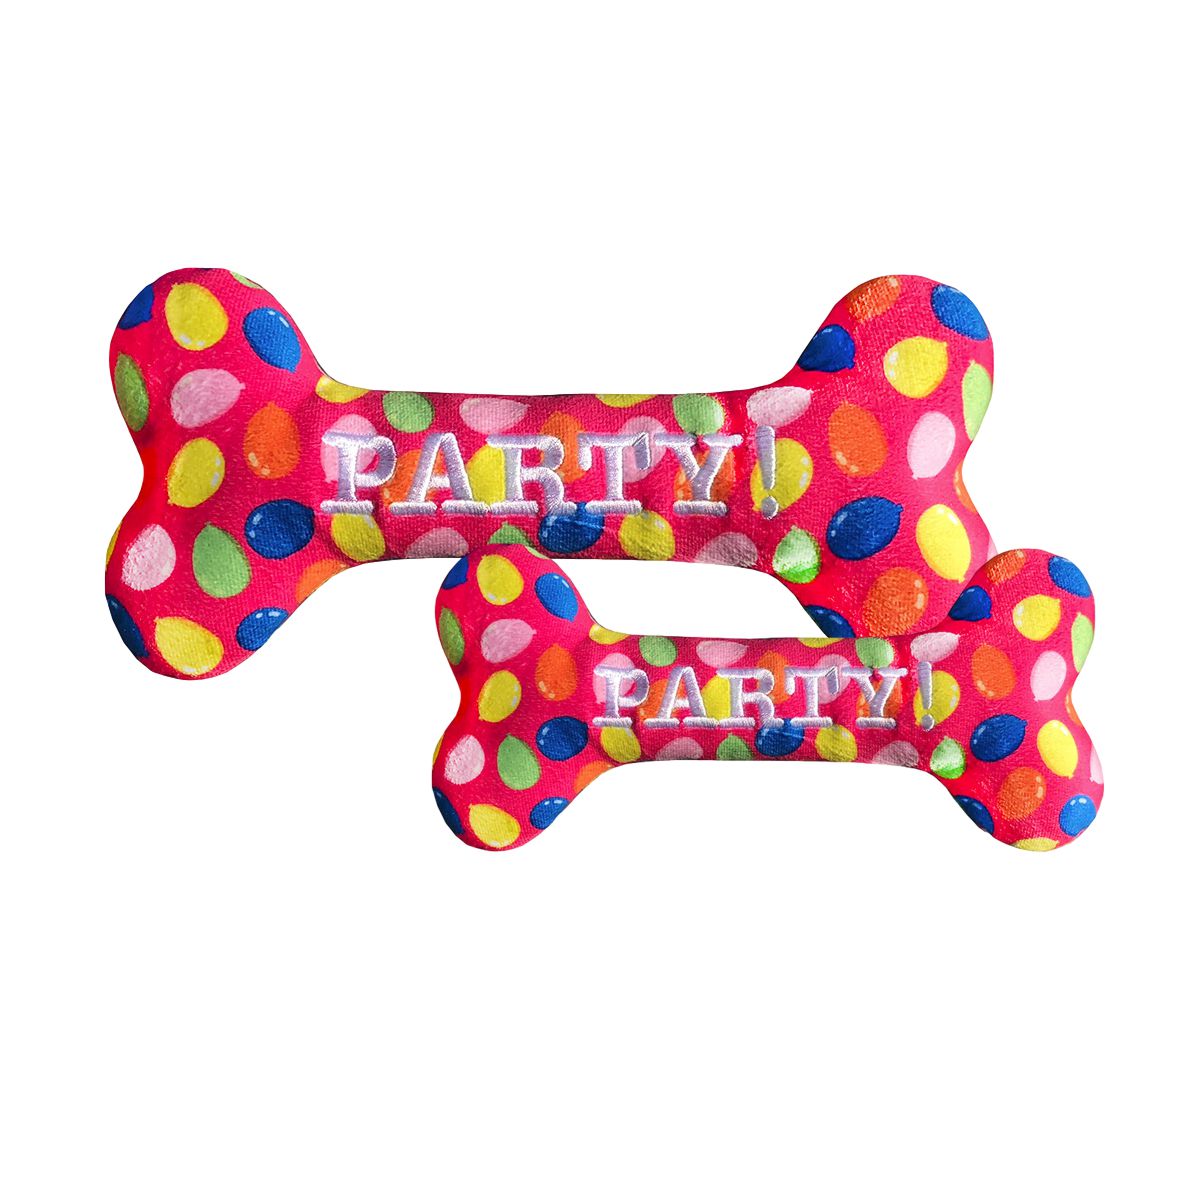 Lulubelles Party Time Bone in Pink | Pawlicious & Company